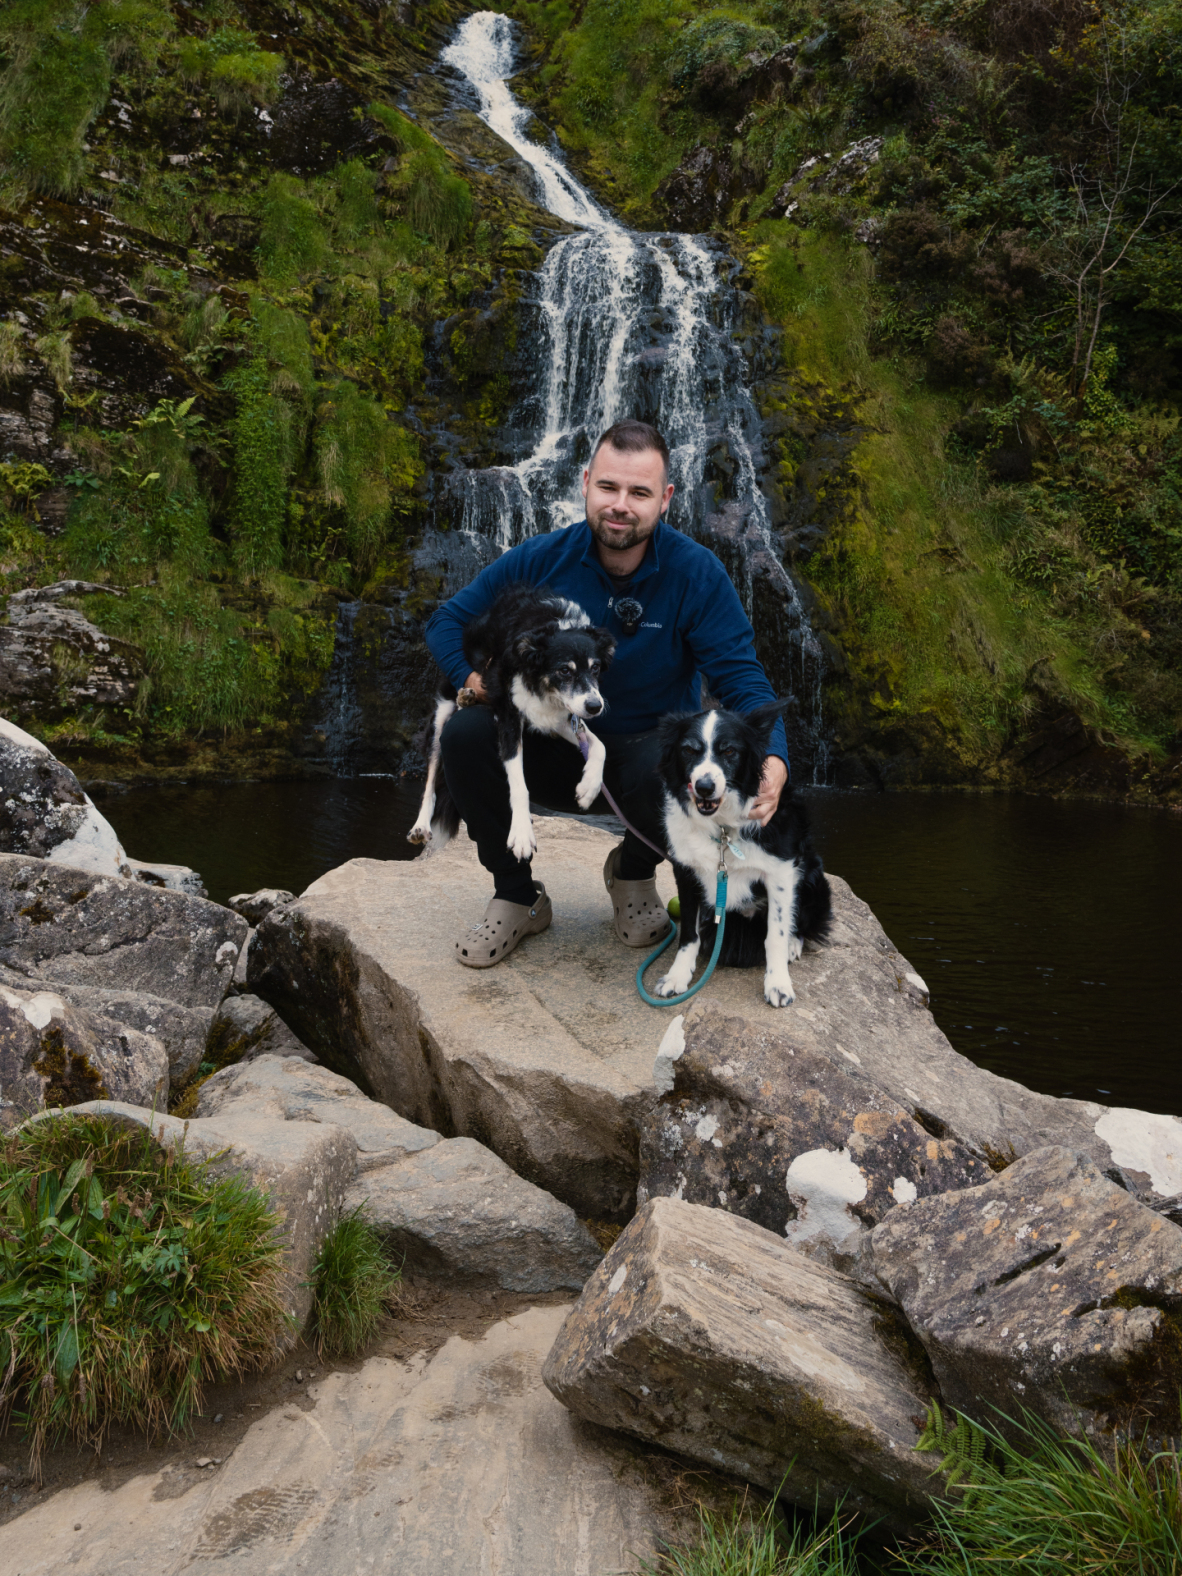 A photo of Robbie Roams, Archie & Gem at a waterfall in Ireland.